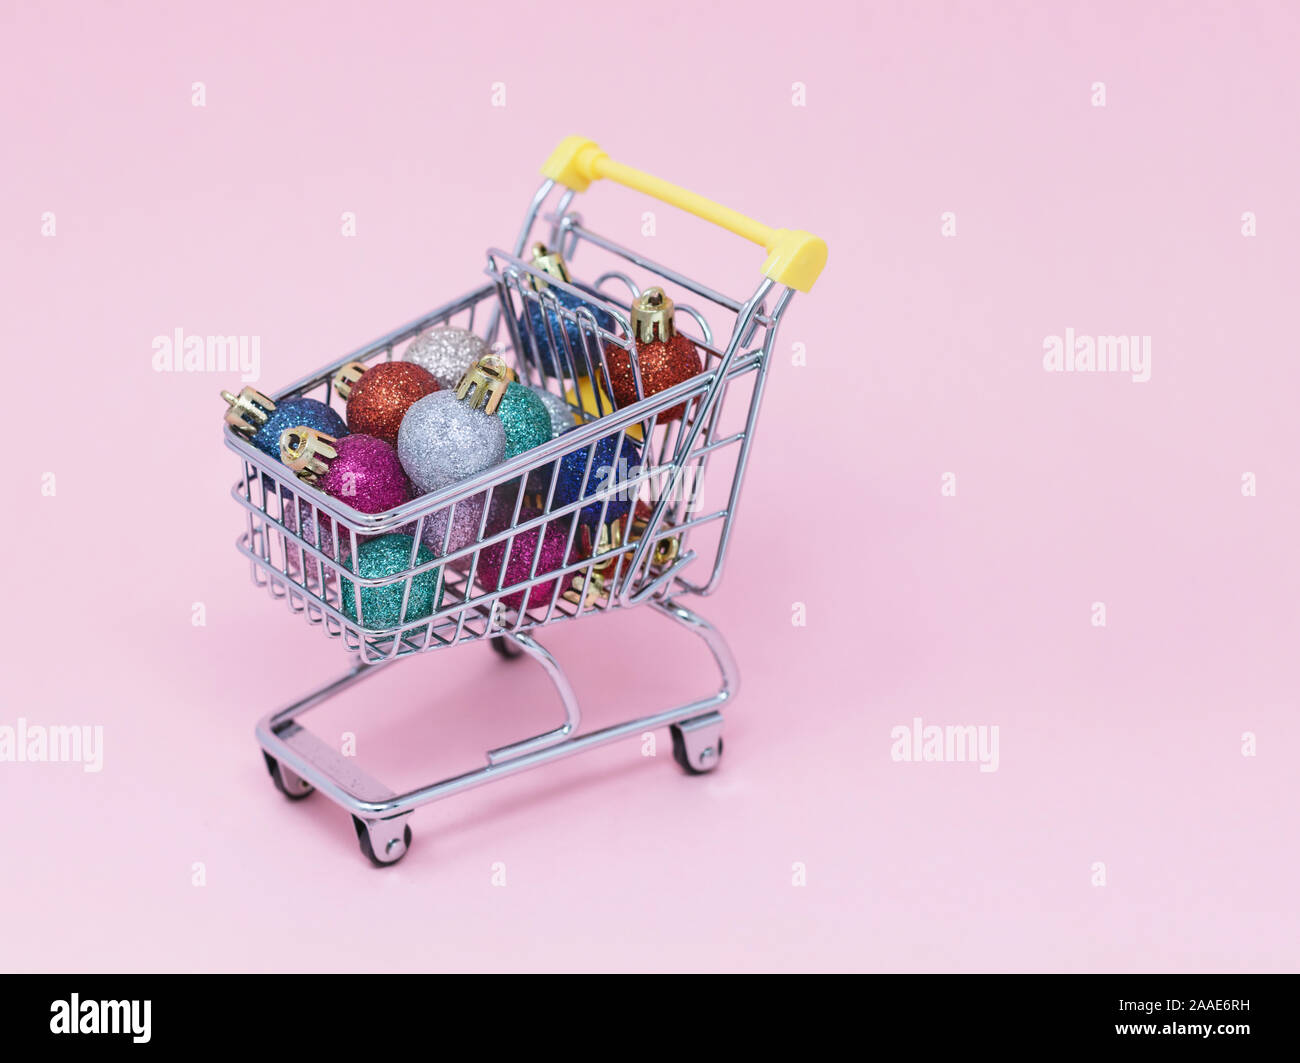 Christmas shopping composition, Trolley filled with sparkly baubles on a pink background Stock Photo